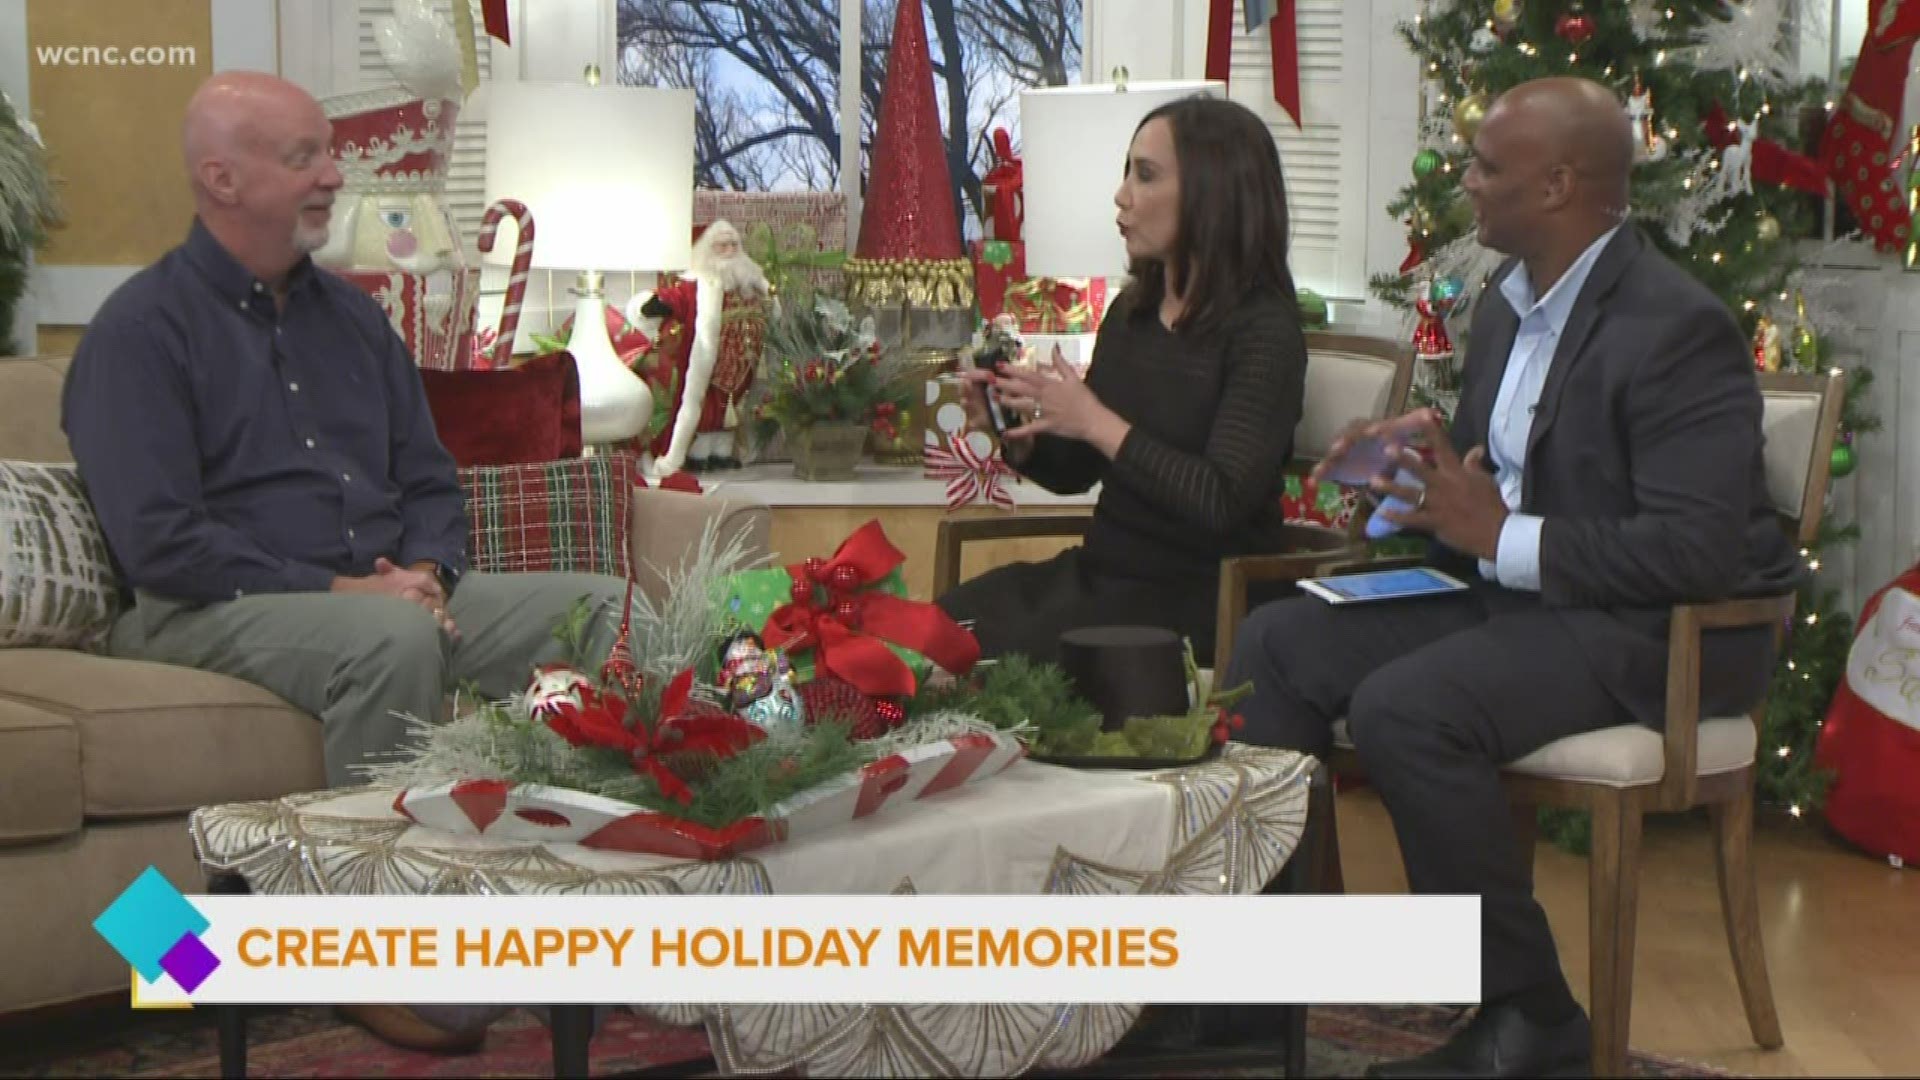 Dr. Chris McCarthy shares how you can create memories with the family this season.